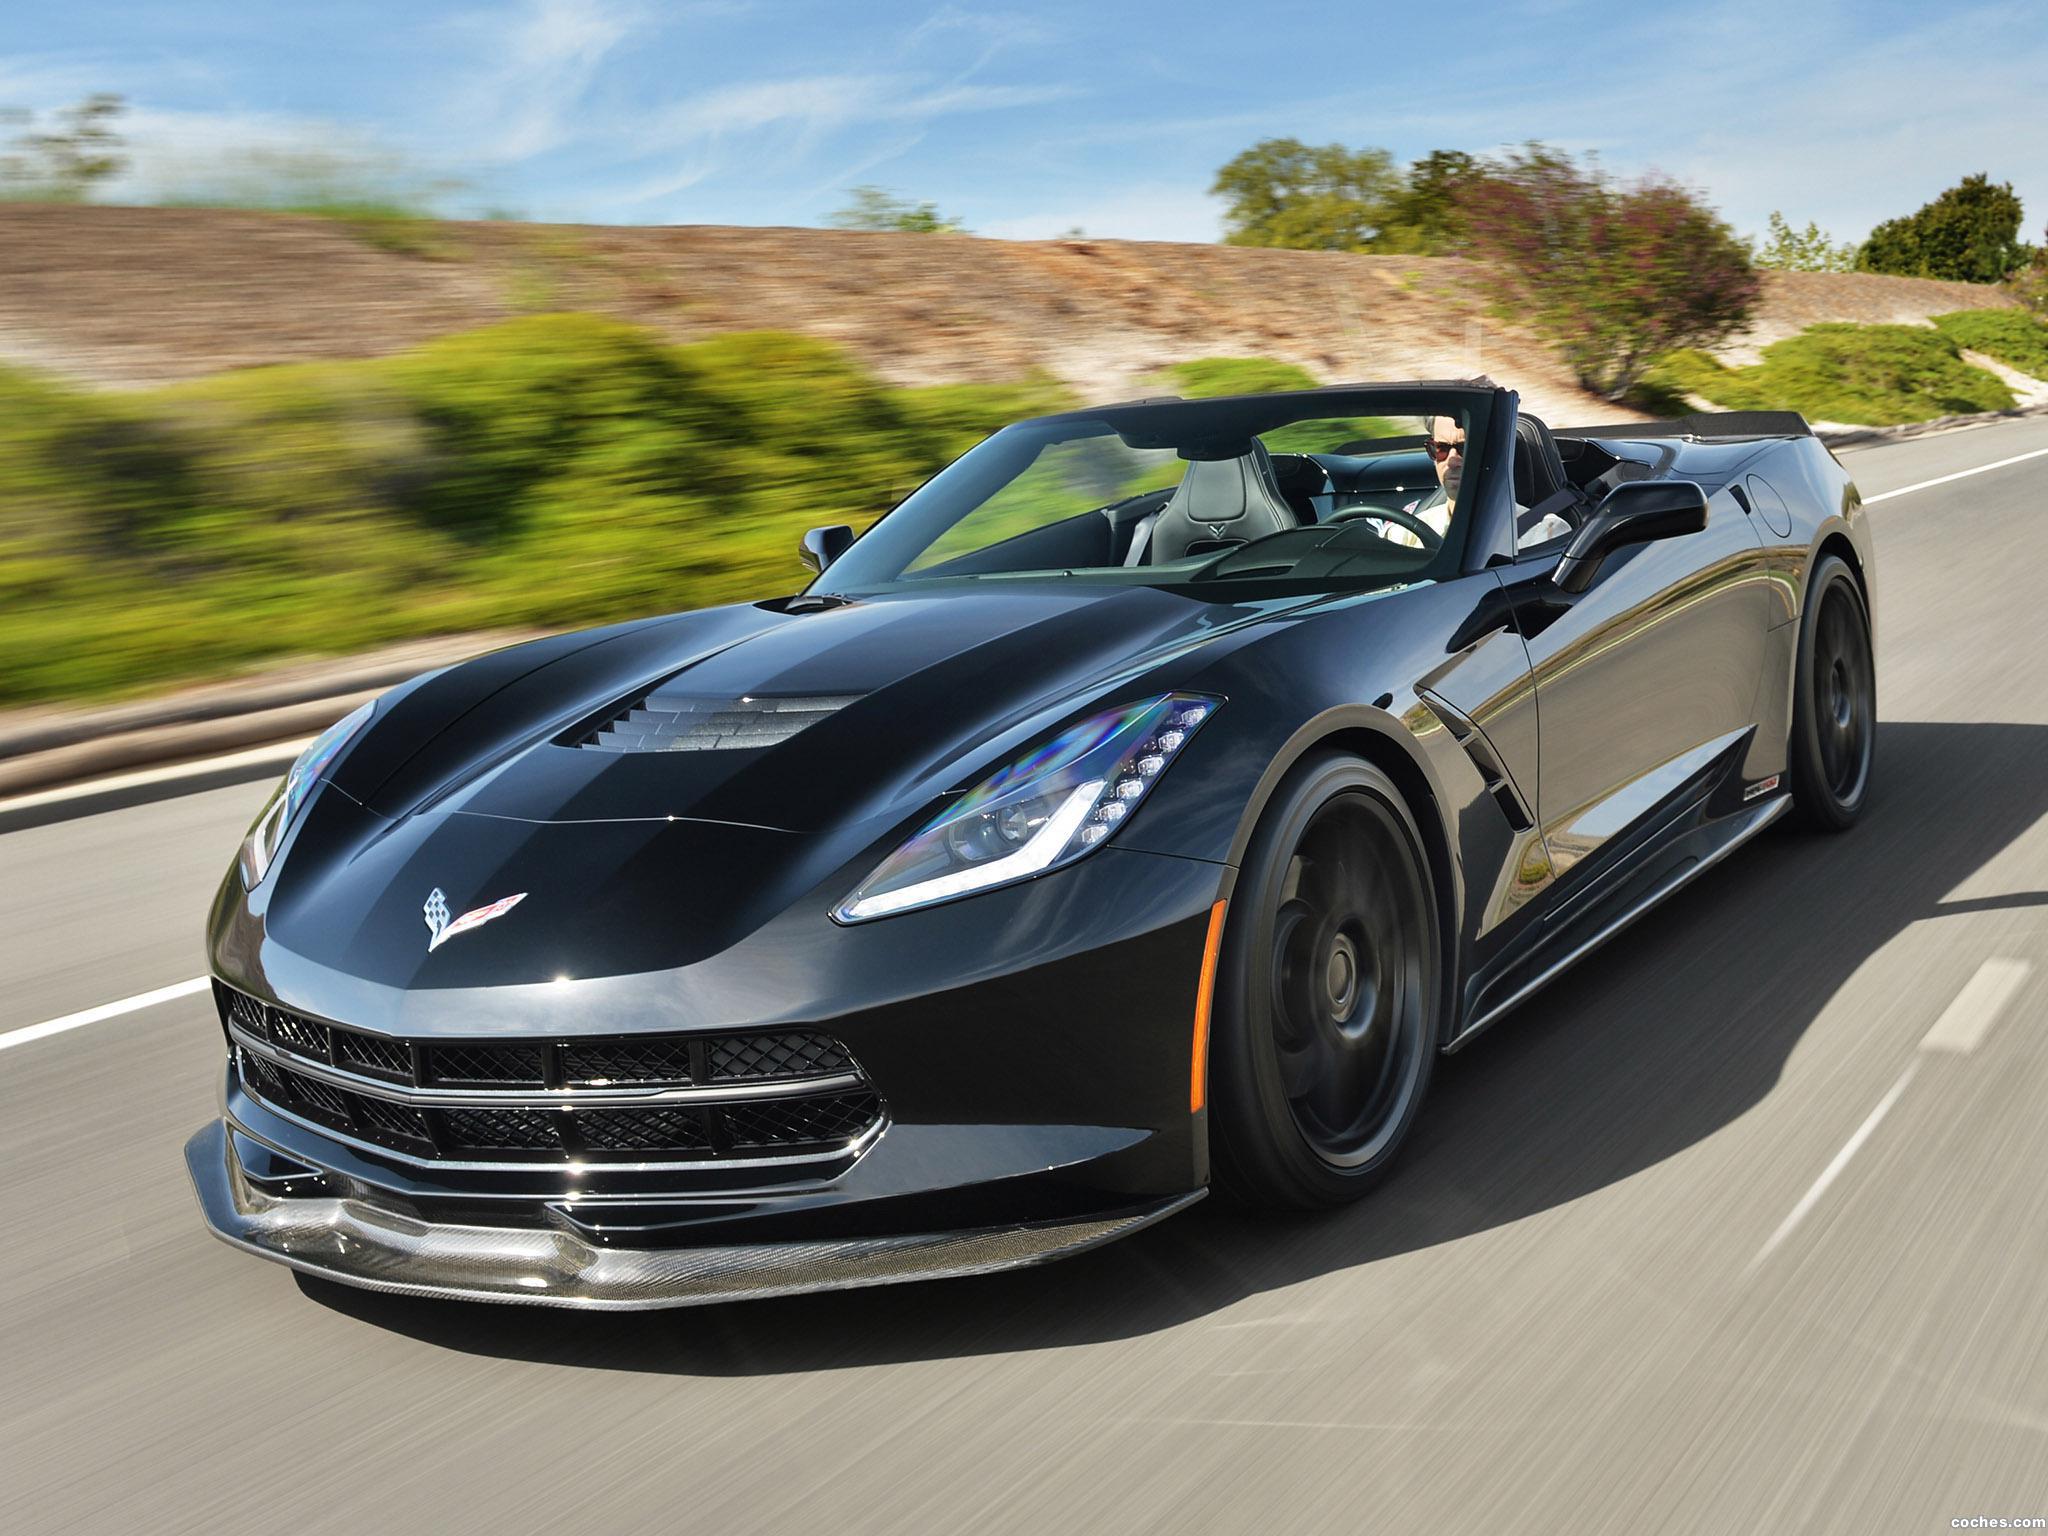 hennessey_chevrolet-corvette-stingray-convertible-hpe700-supercharged-2014_r11